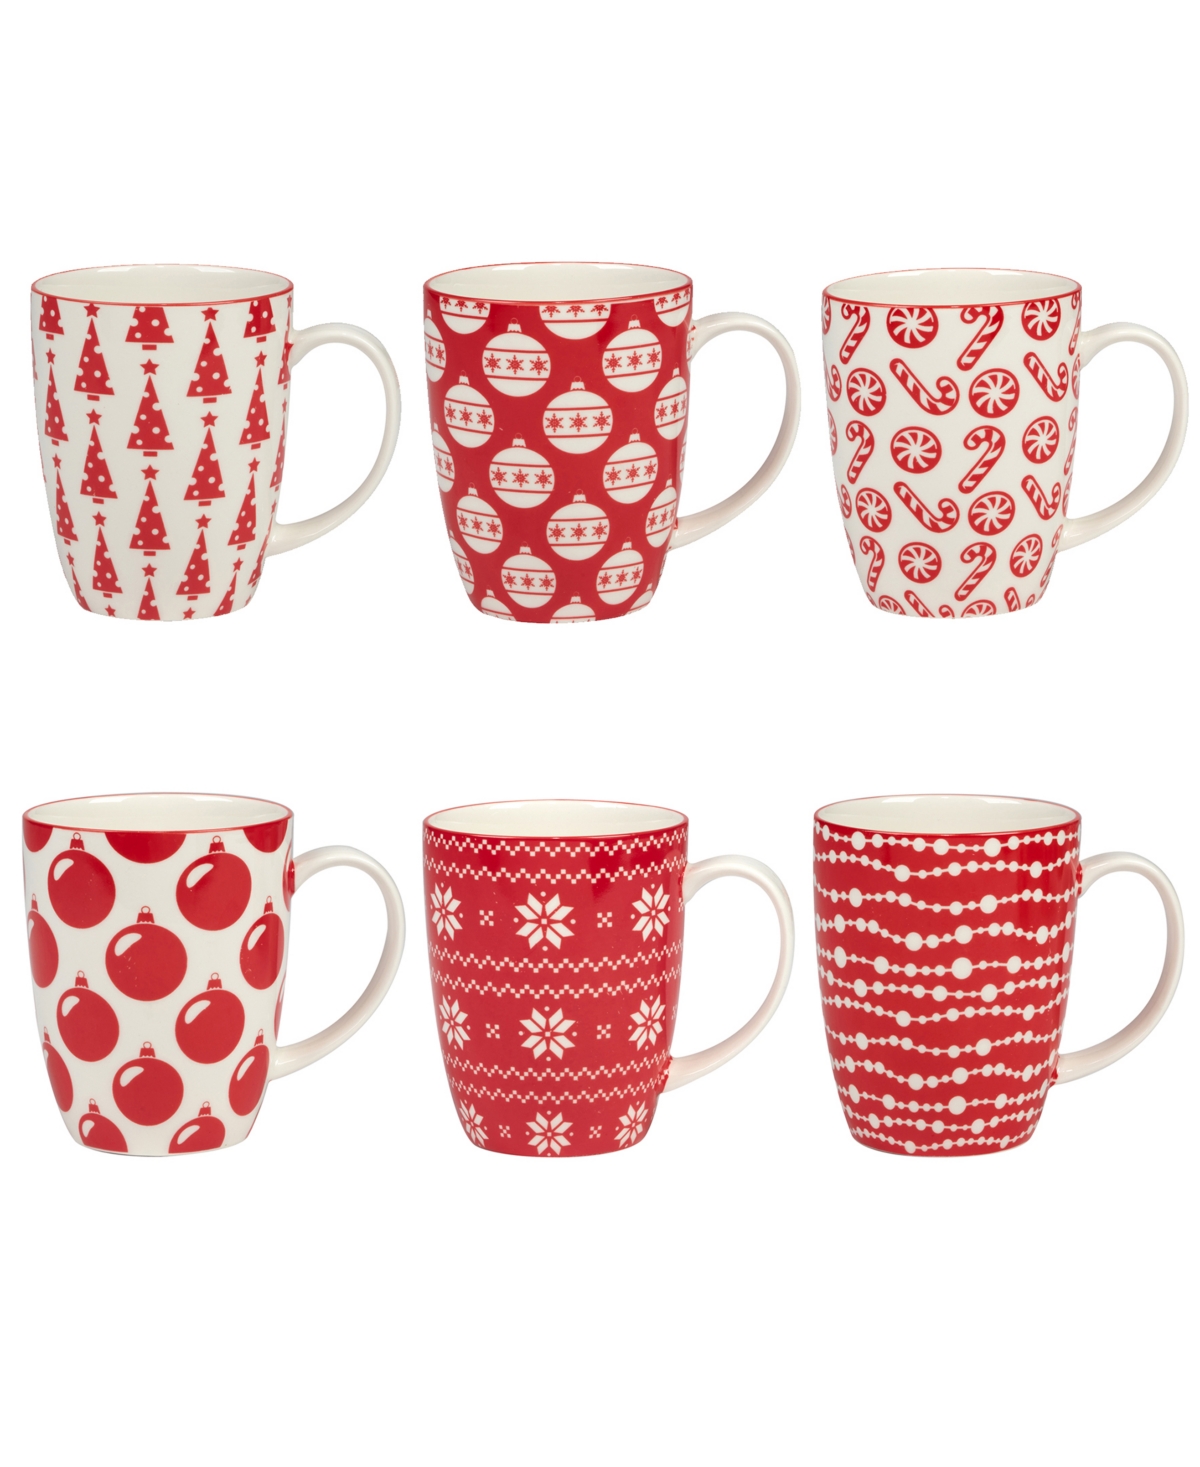 Certified International Peppermint Candy 16 oz Mugs Set Of 6, Service For 6 In Red